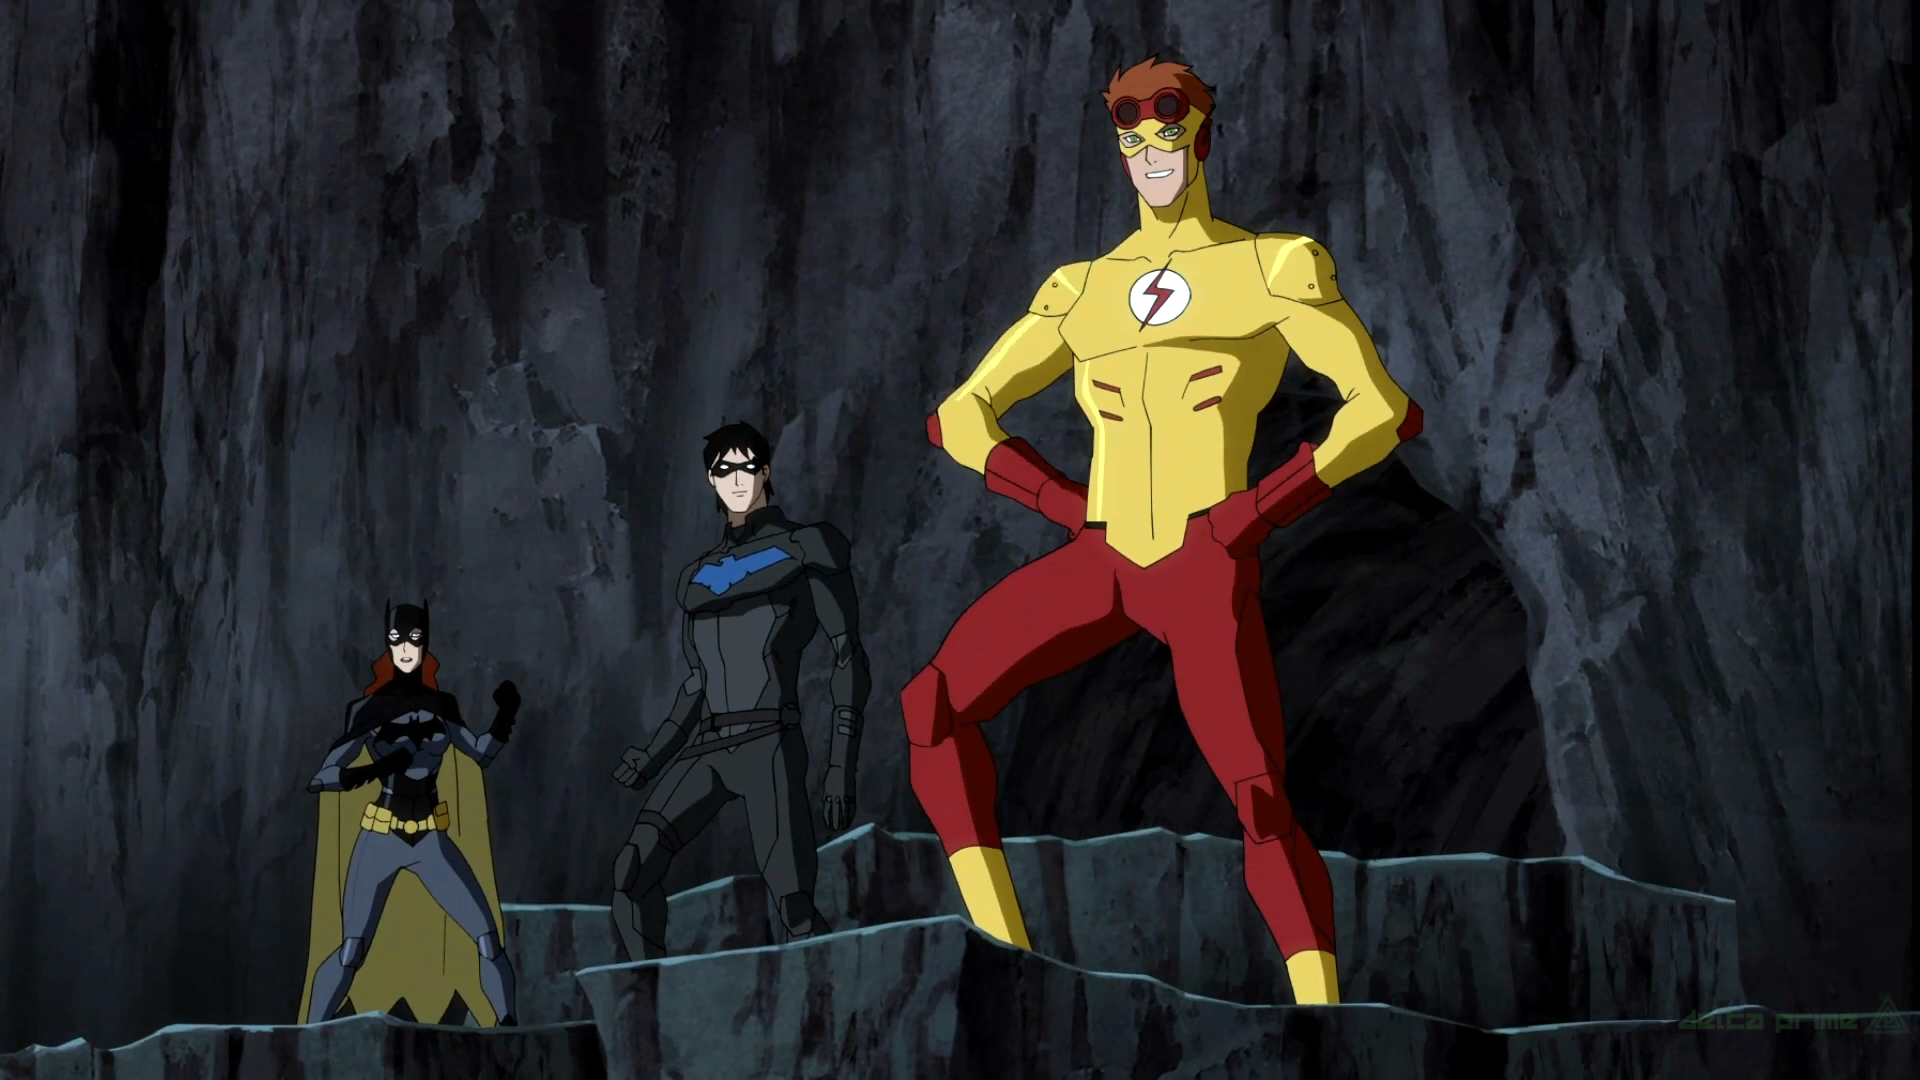 General 1920x1080 Young Justice Kid Flash Wally West Nightwing Oracle Dick Grayson superhero